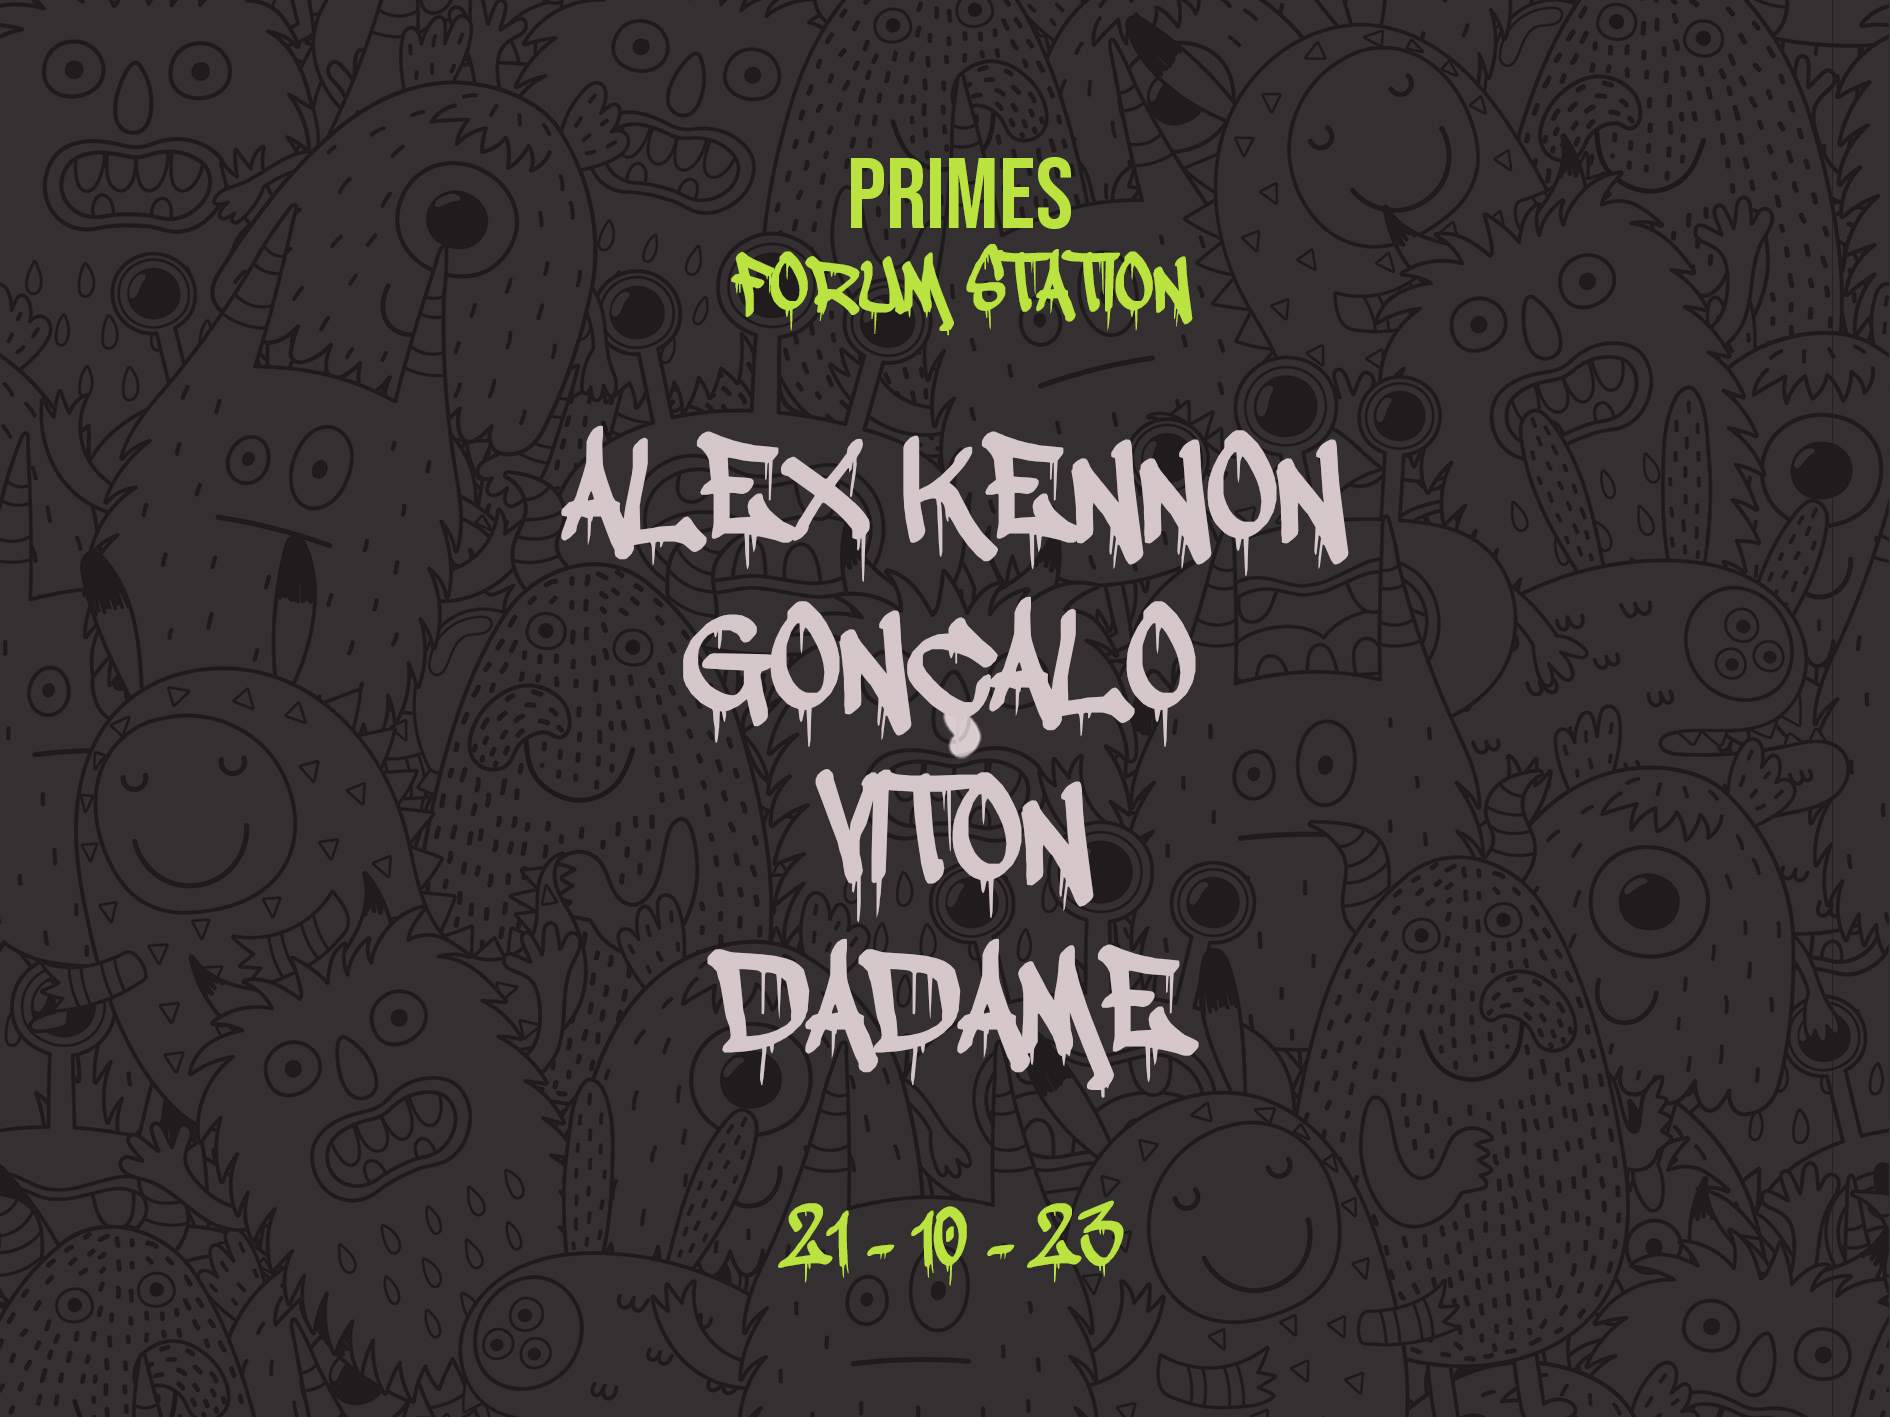 PRIMES at Forum Station(Black Bus) *Free Tickets - Limited Capacity - フライヤー裏